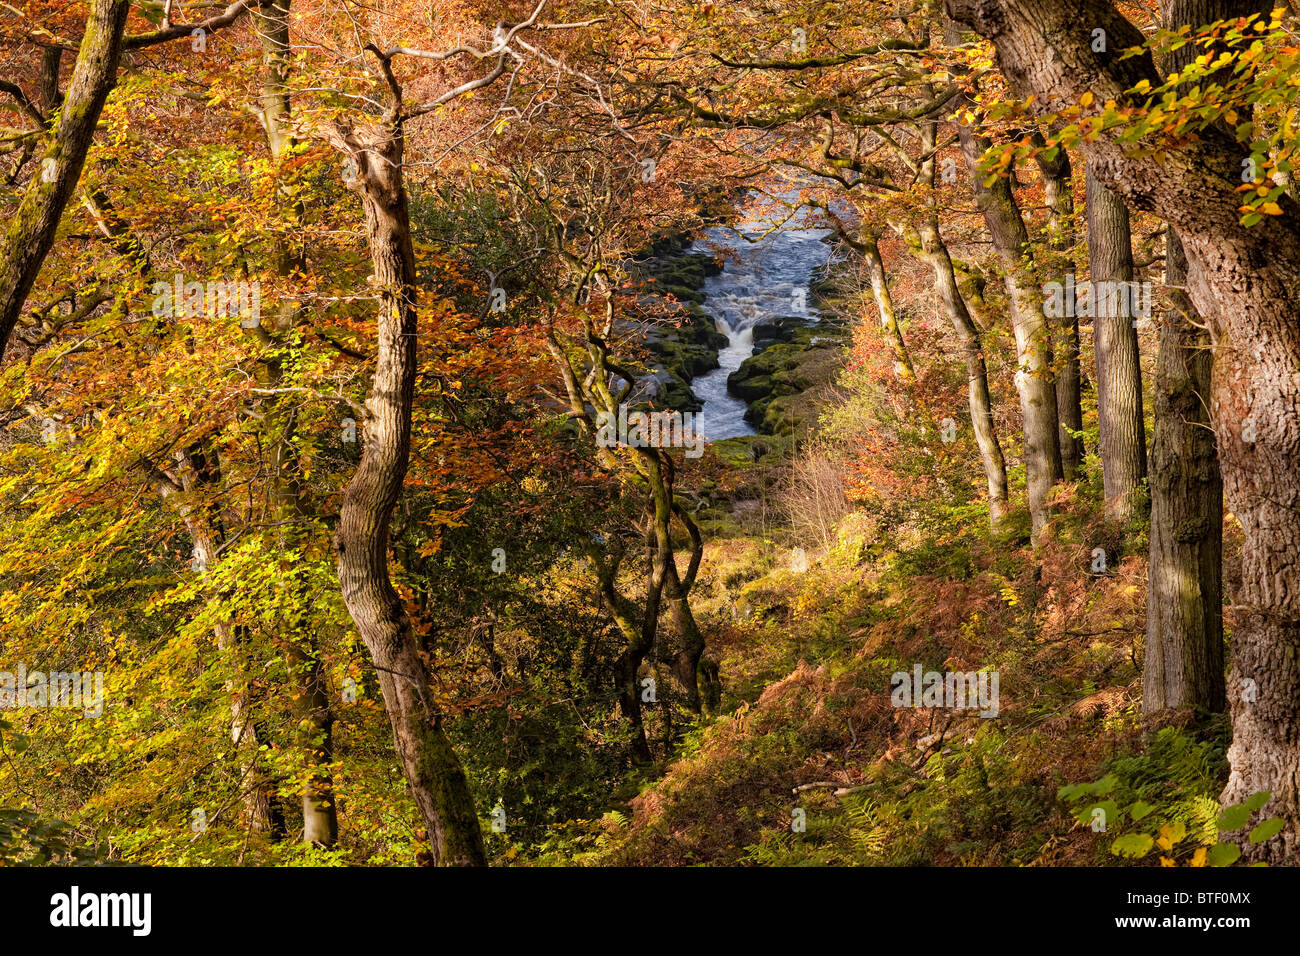 The Strid, a narrow section of the River Wharfe in the Strid Woods at Bolton Abbey, North Yorkshire. Autumn Stock Photo